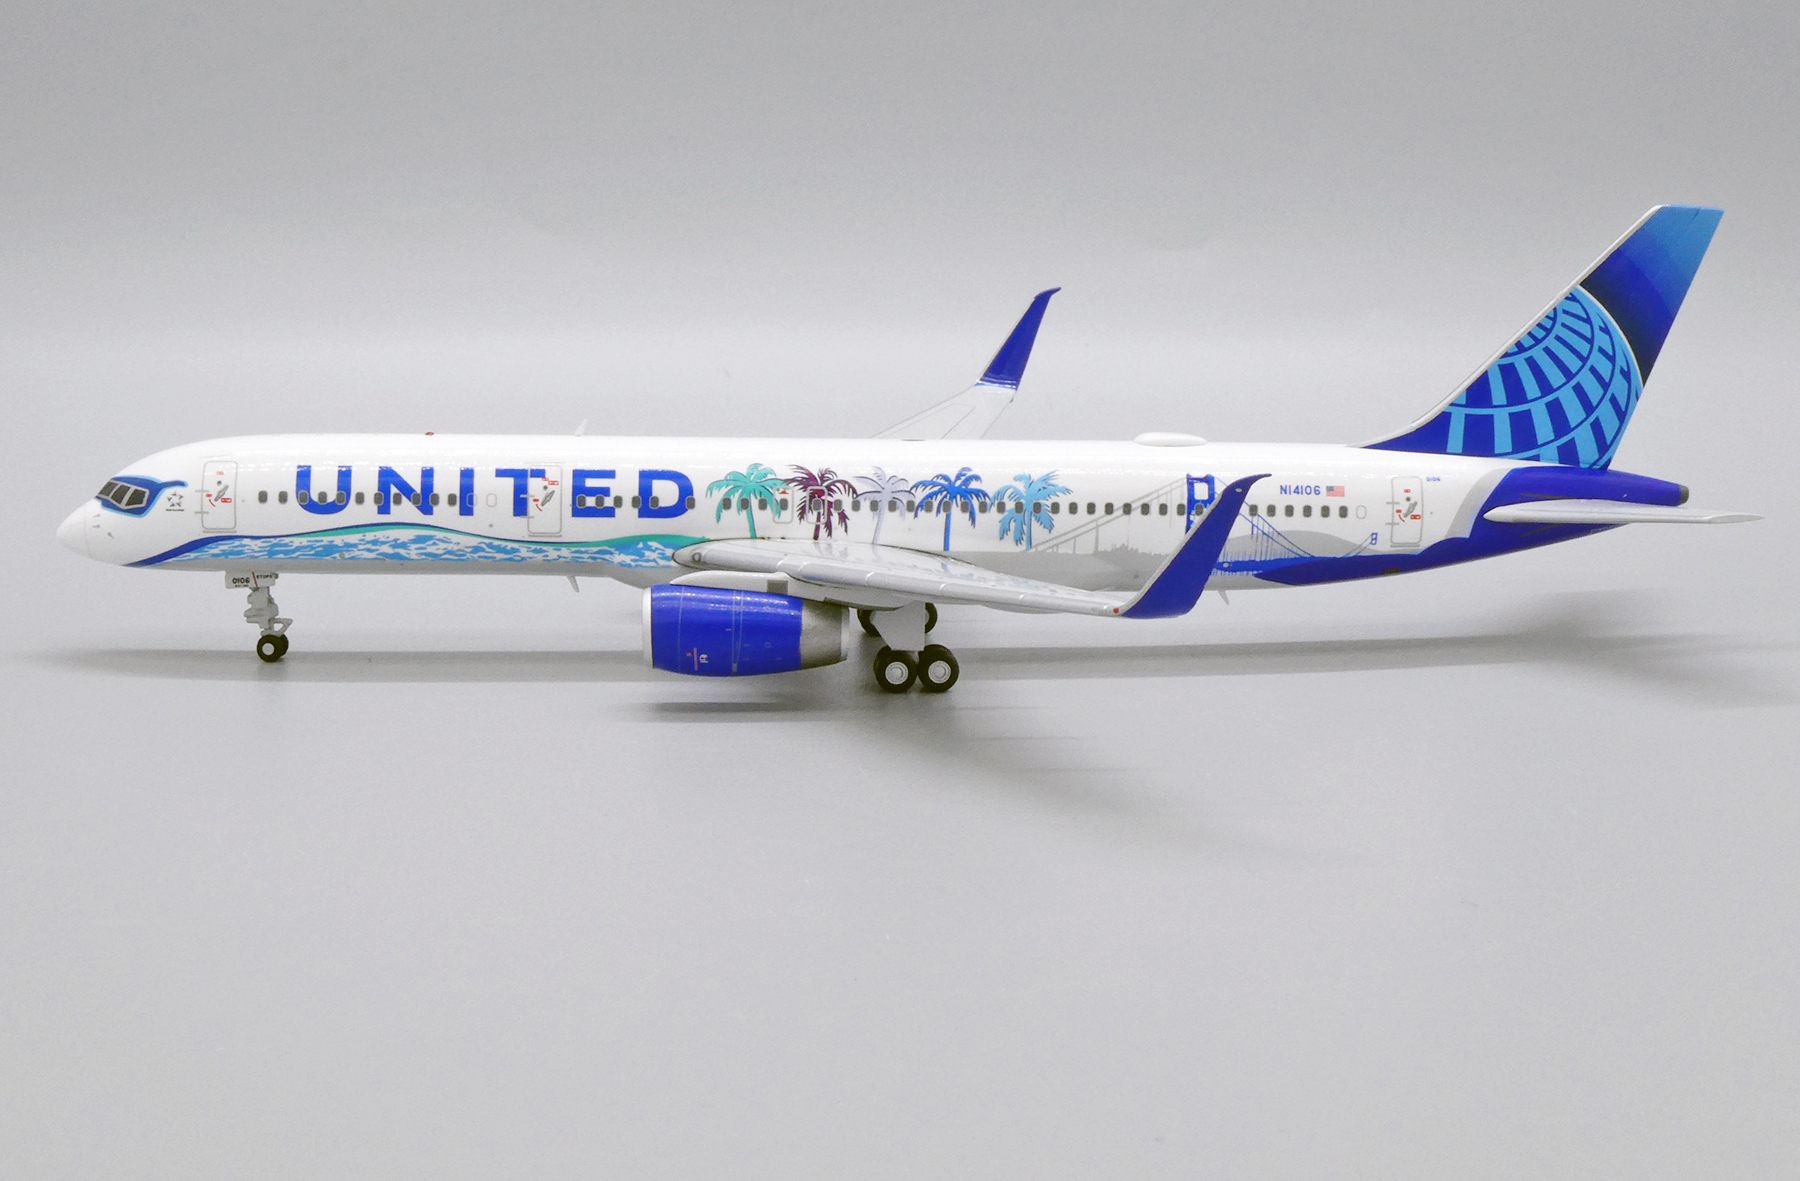 JC Wings jclh 2269 1/200 United Airlines B757 son art ici New York N14102 avec STD 